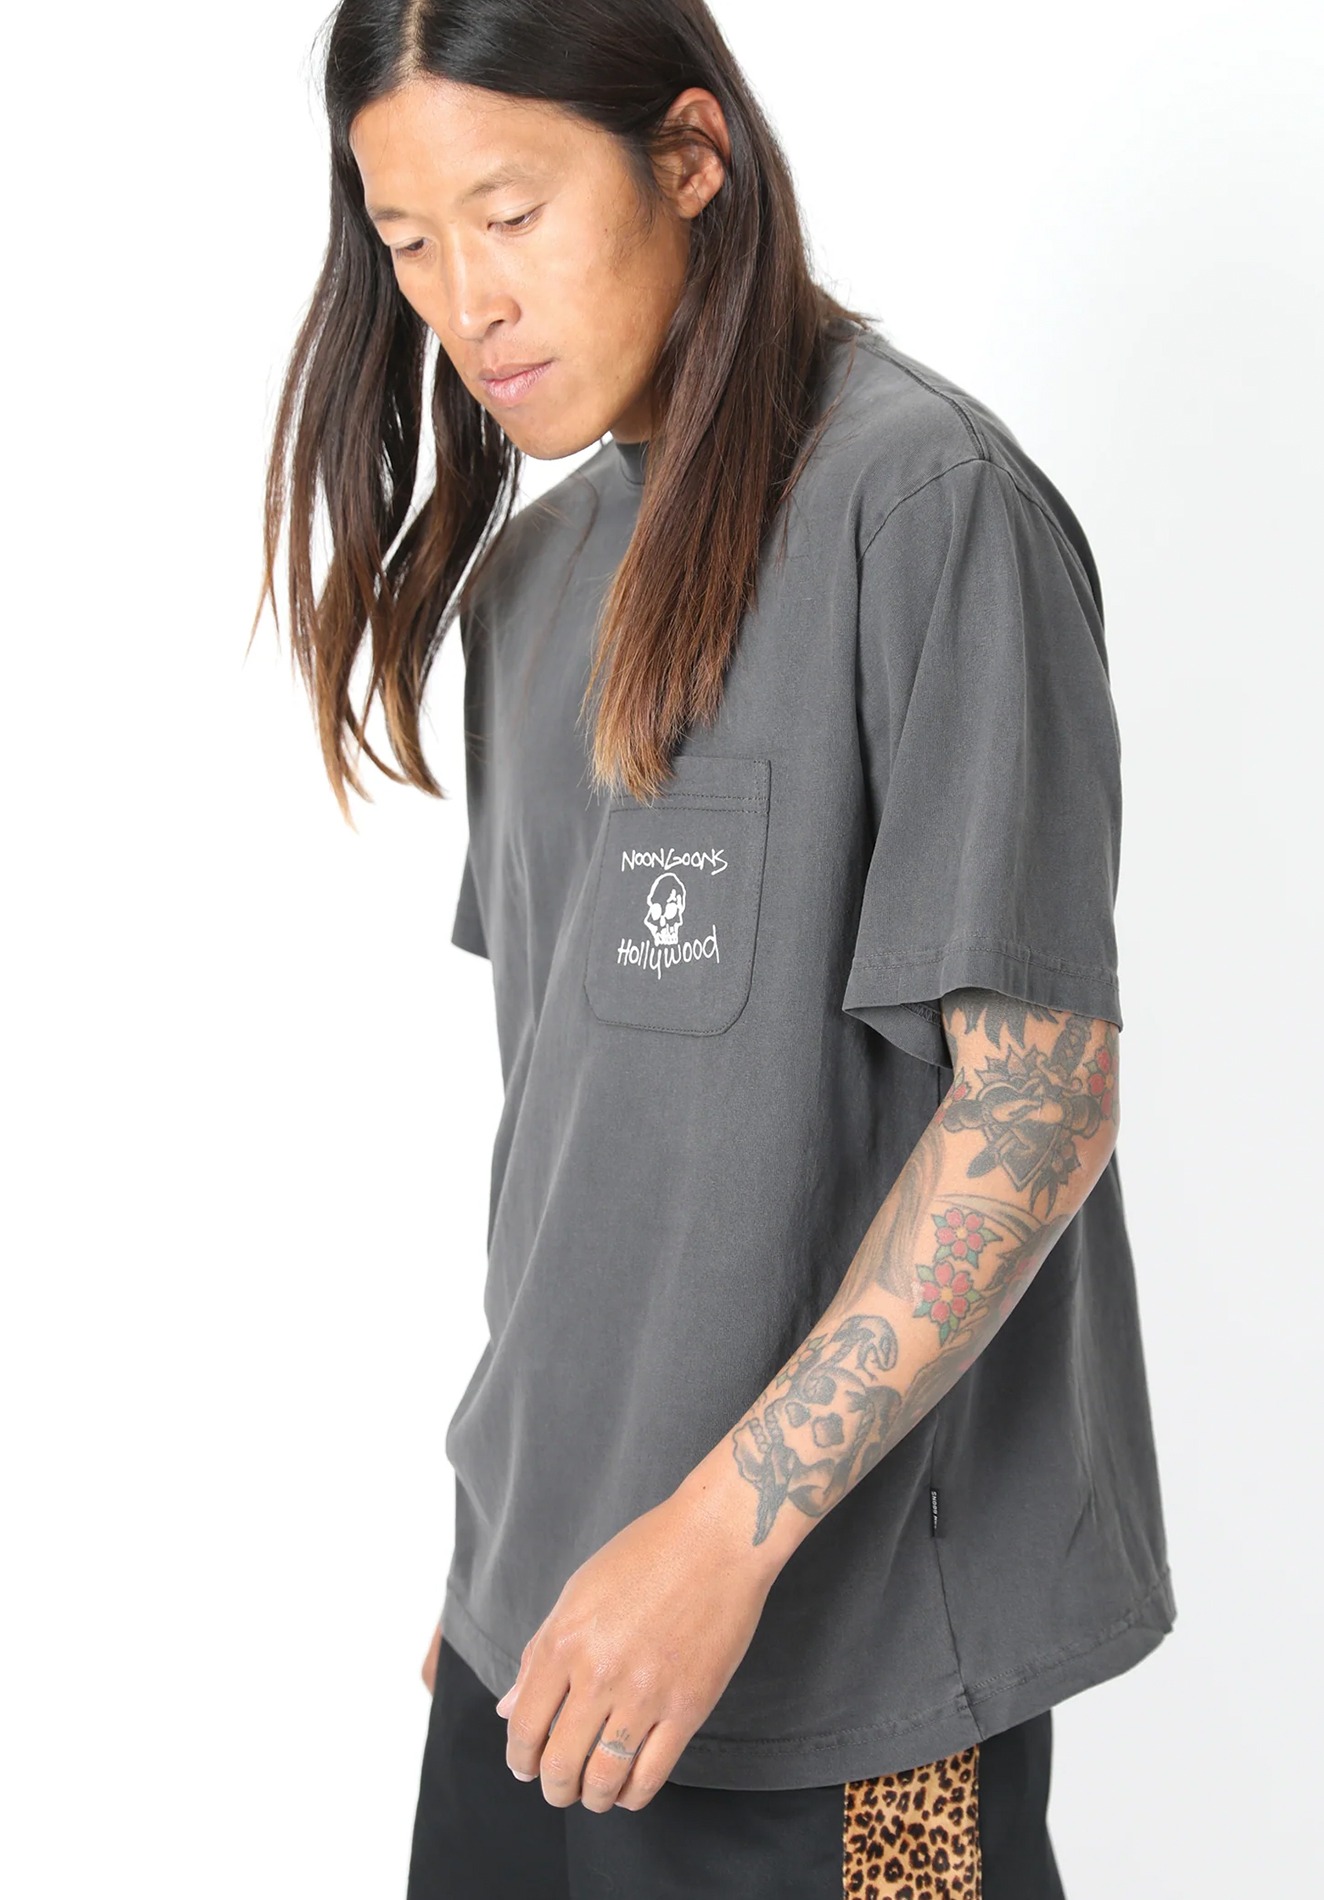 MADE IN HOLLYWOOD POCKET T, PIGMENT BLACK